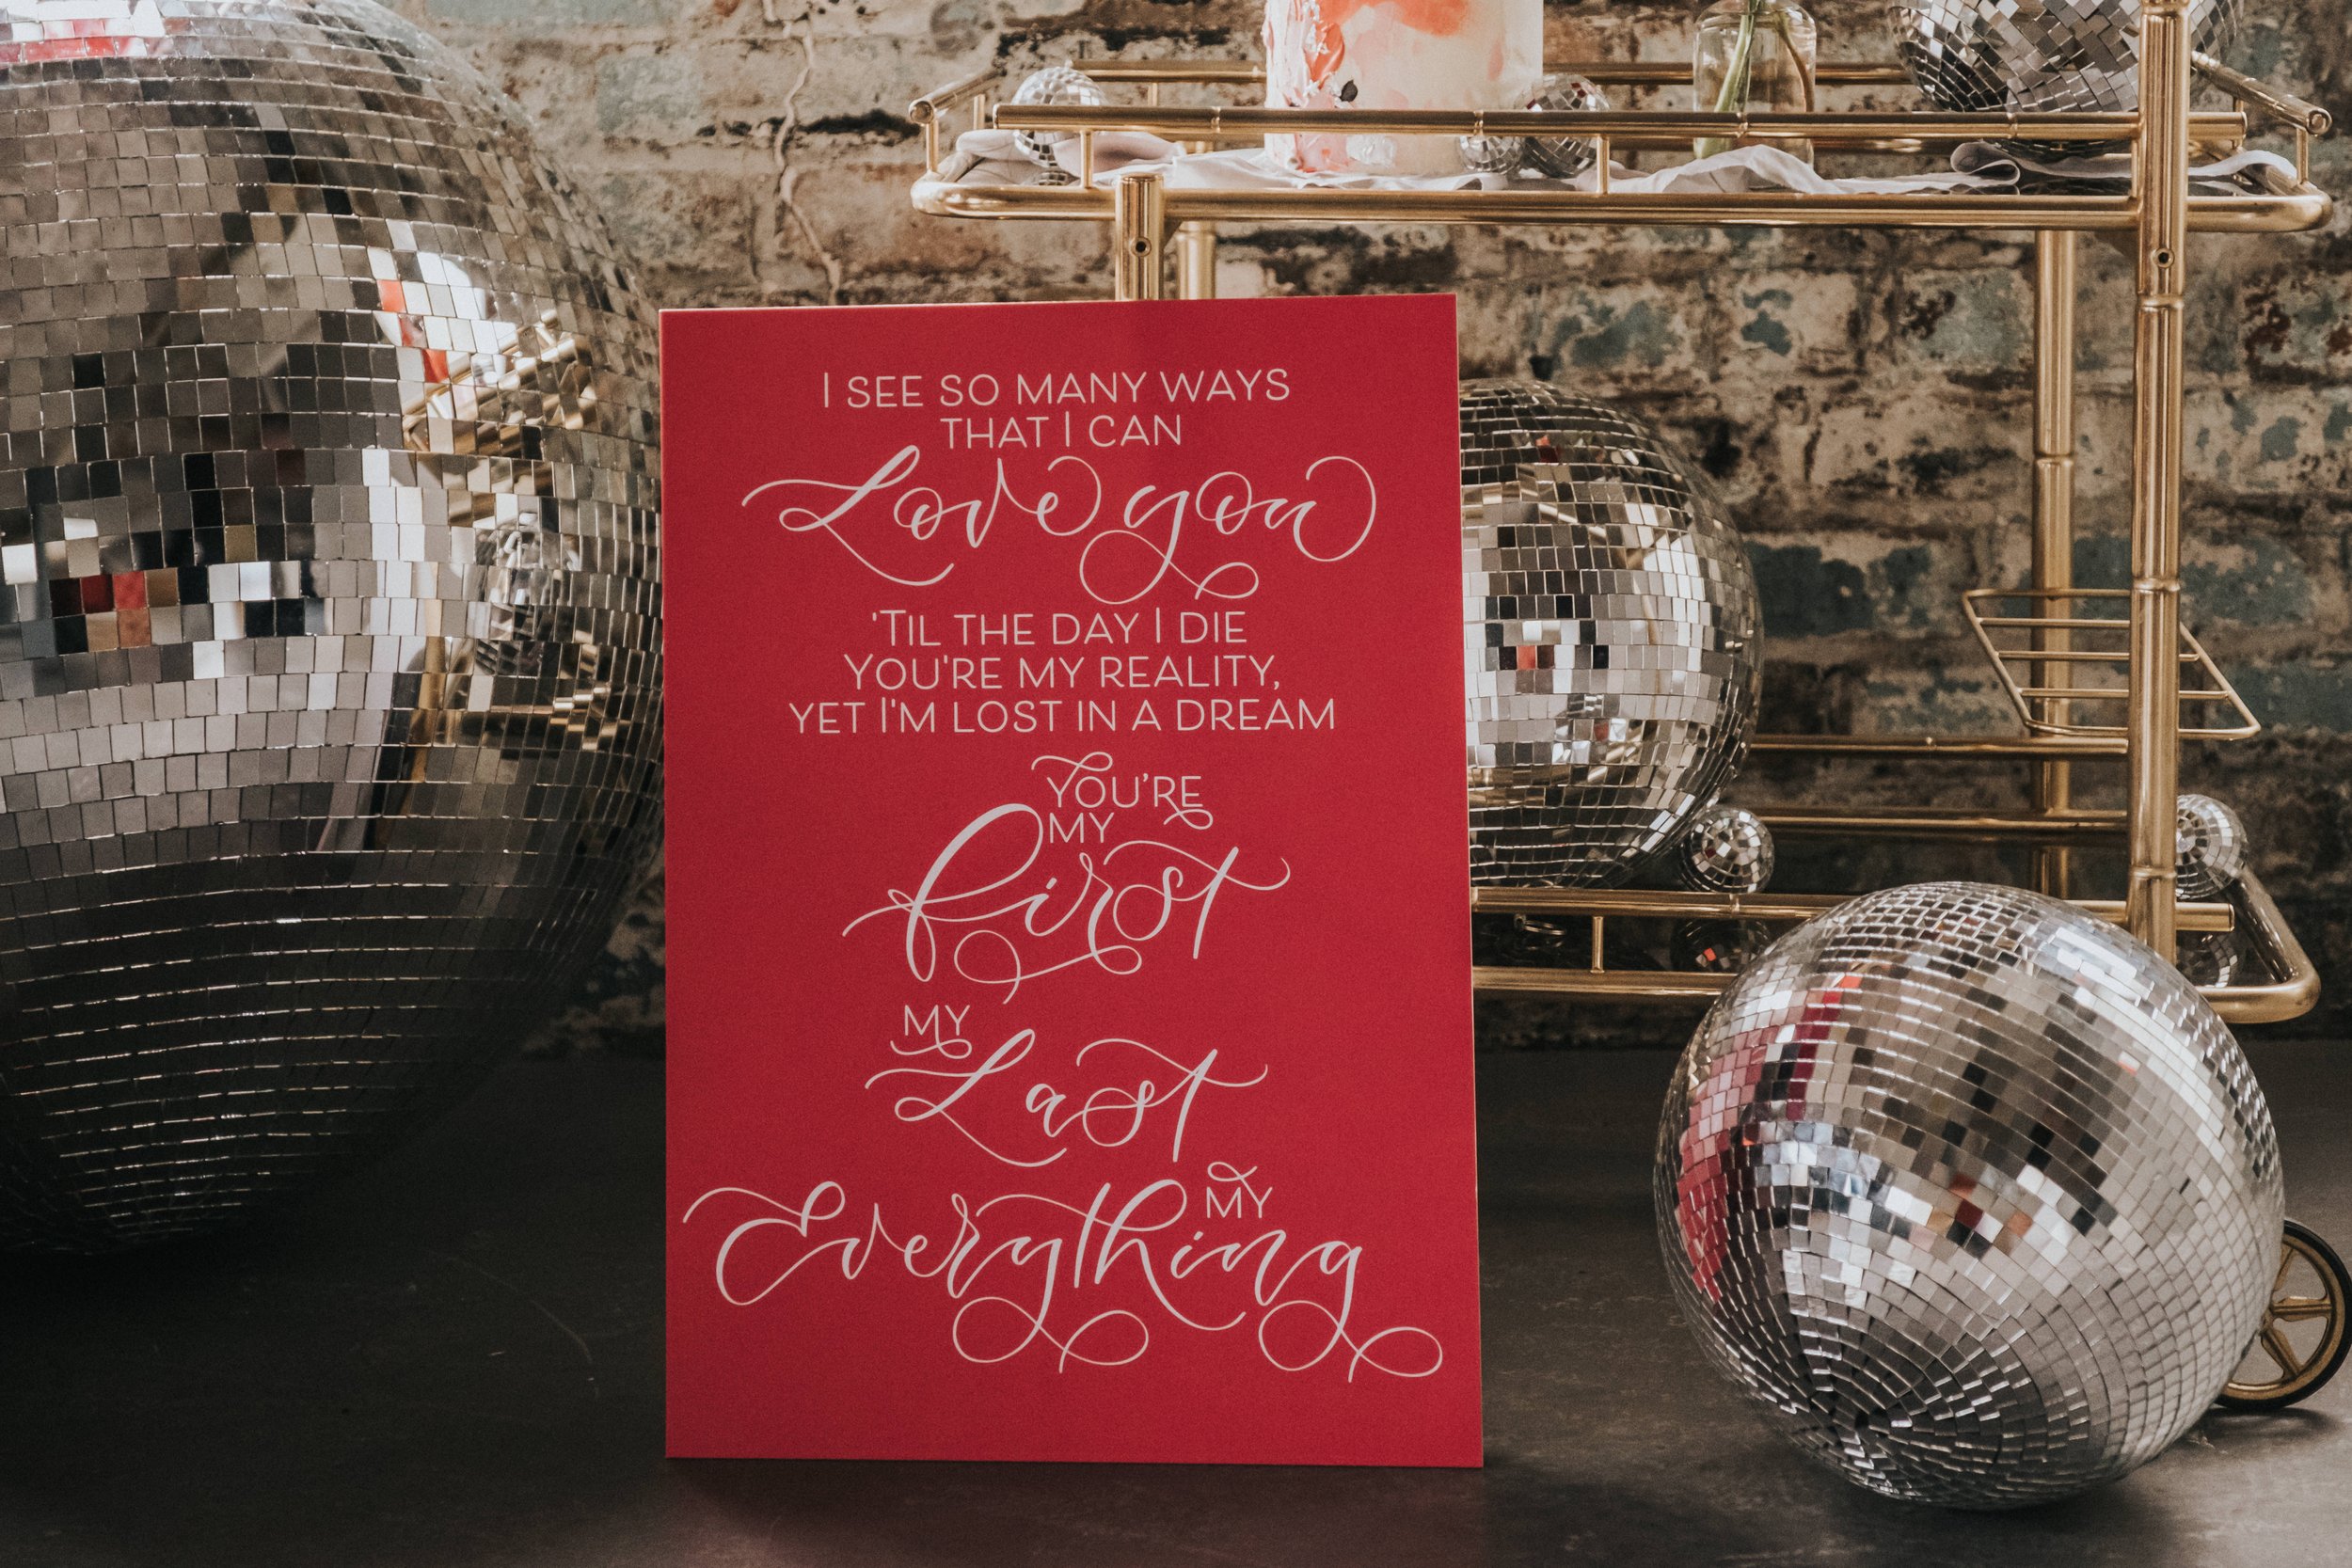 Disco themed wedding stationery with pink, black, grey and red colour scheme - disco ball wedding - calligraphy wedding signage and welcome sign - wedding sign with first dance lyrics.jpg